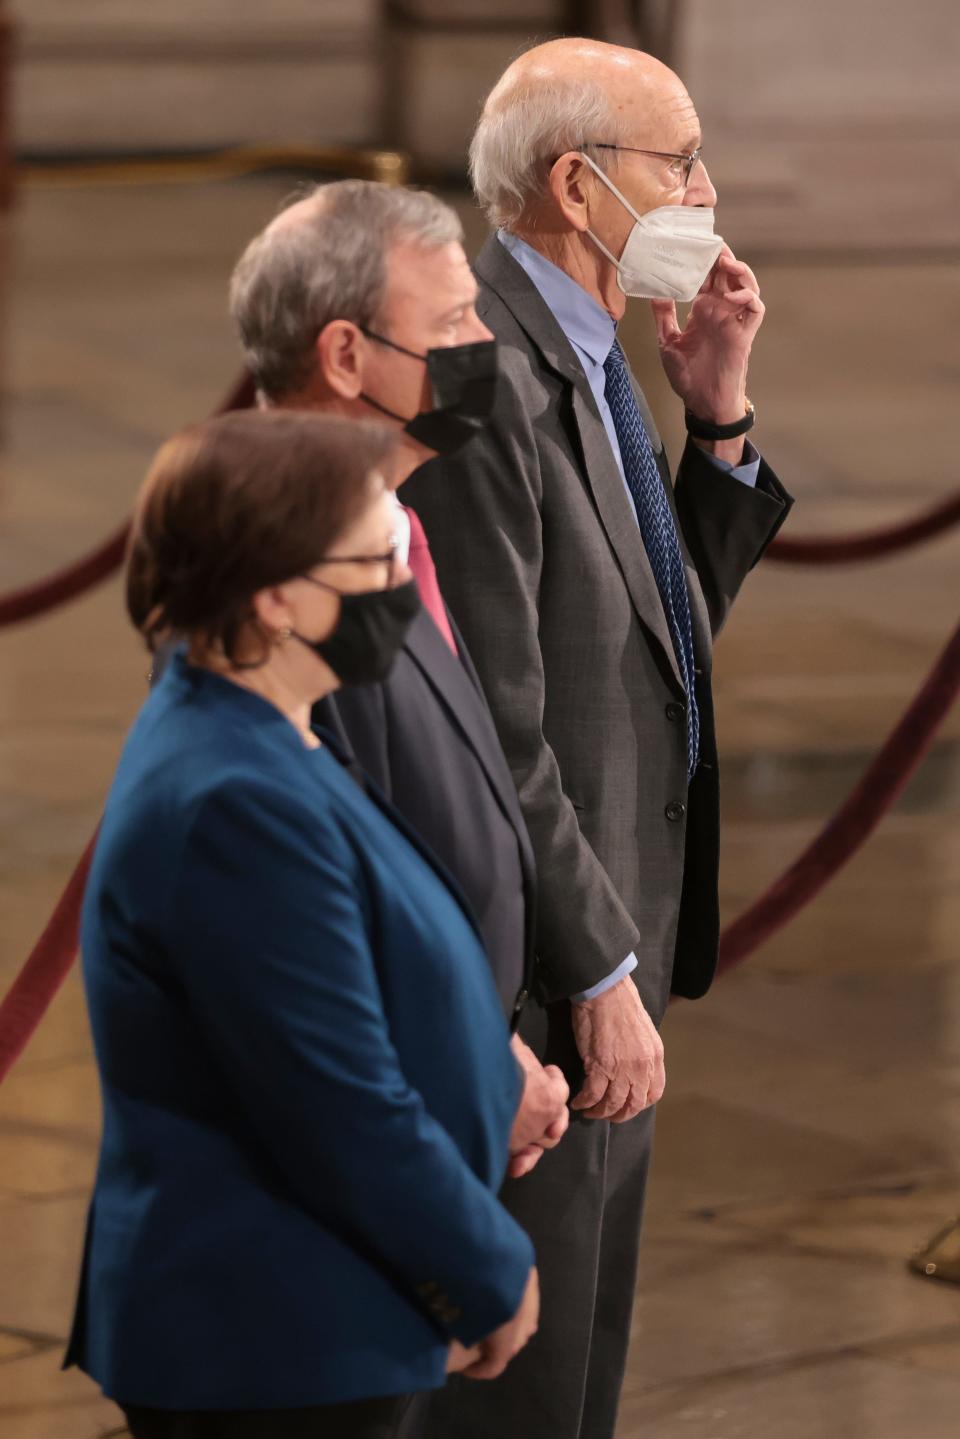 Associate Justice Elena Kagan, Chief Justice John Roberts, and Associate Justice Stephen Breyer pay their respects to former Sen. Bob Dole of Kansas, who lies in state in the Rotunda of the U.S. Capitol building on Dec. 9, 2021.